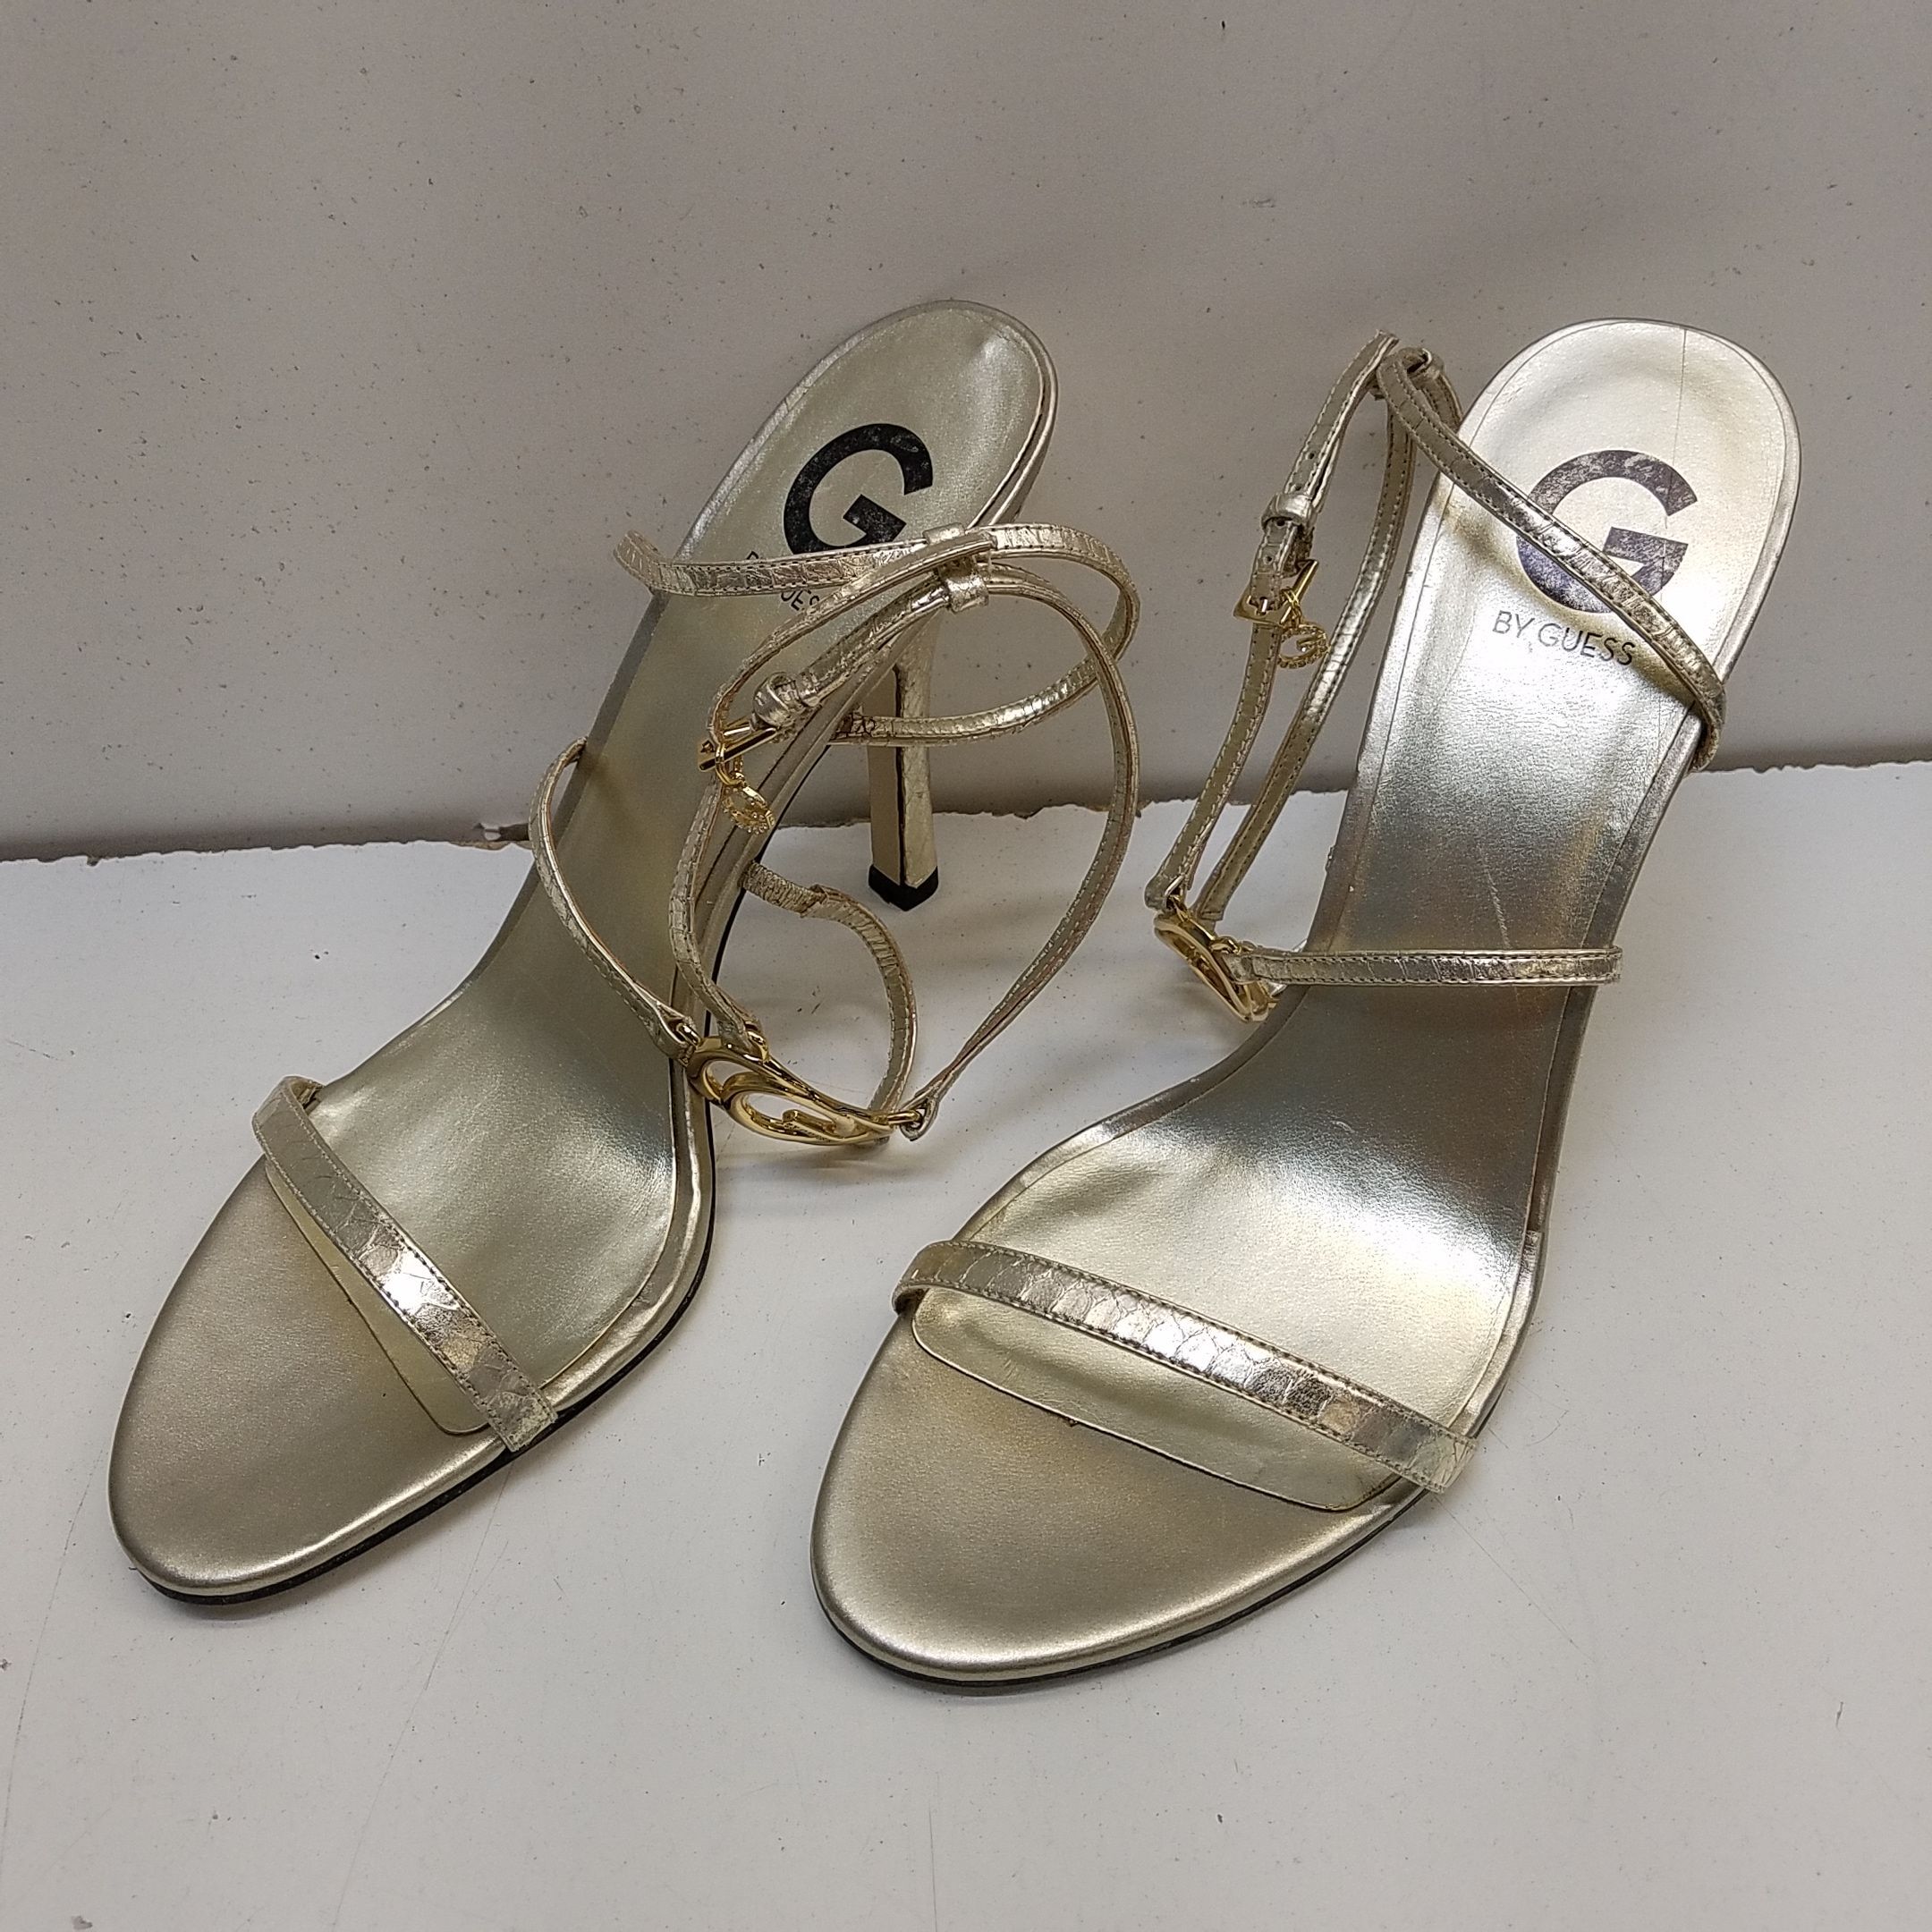 G by Guess | Shoes | G By Guess Women Open Toe Heels Light Gold Beige Size  7m Cocktail Party | Poshmark